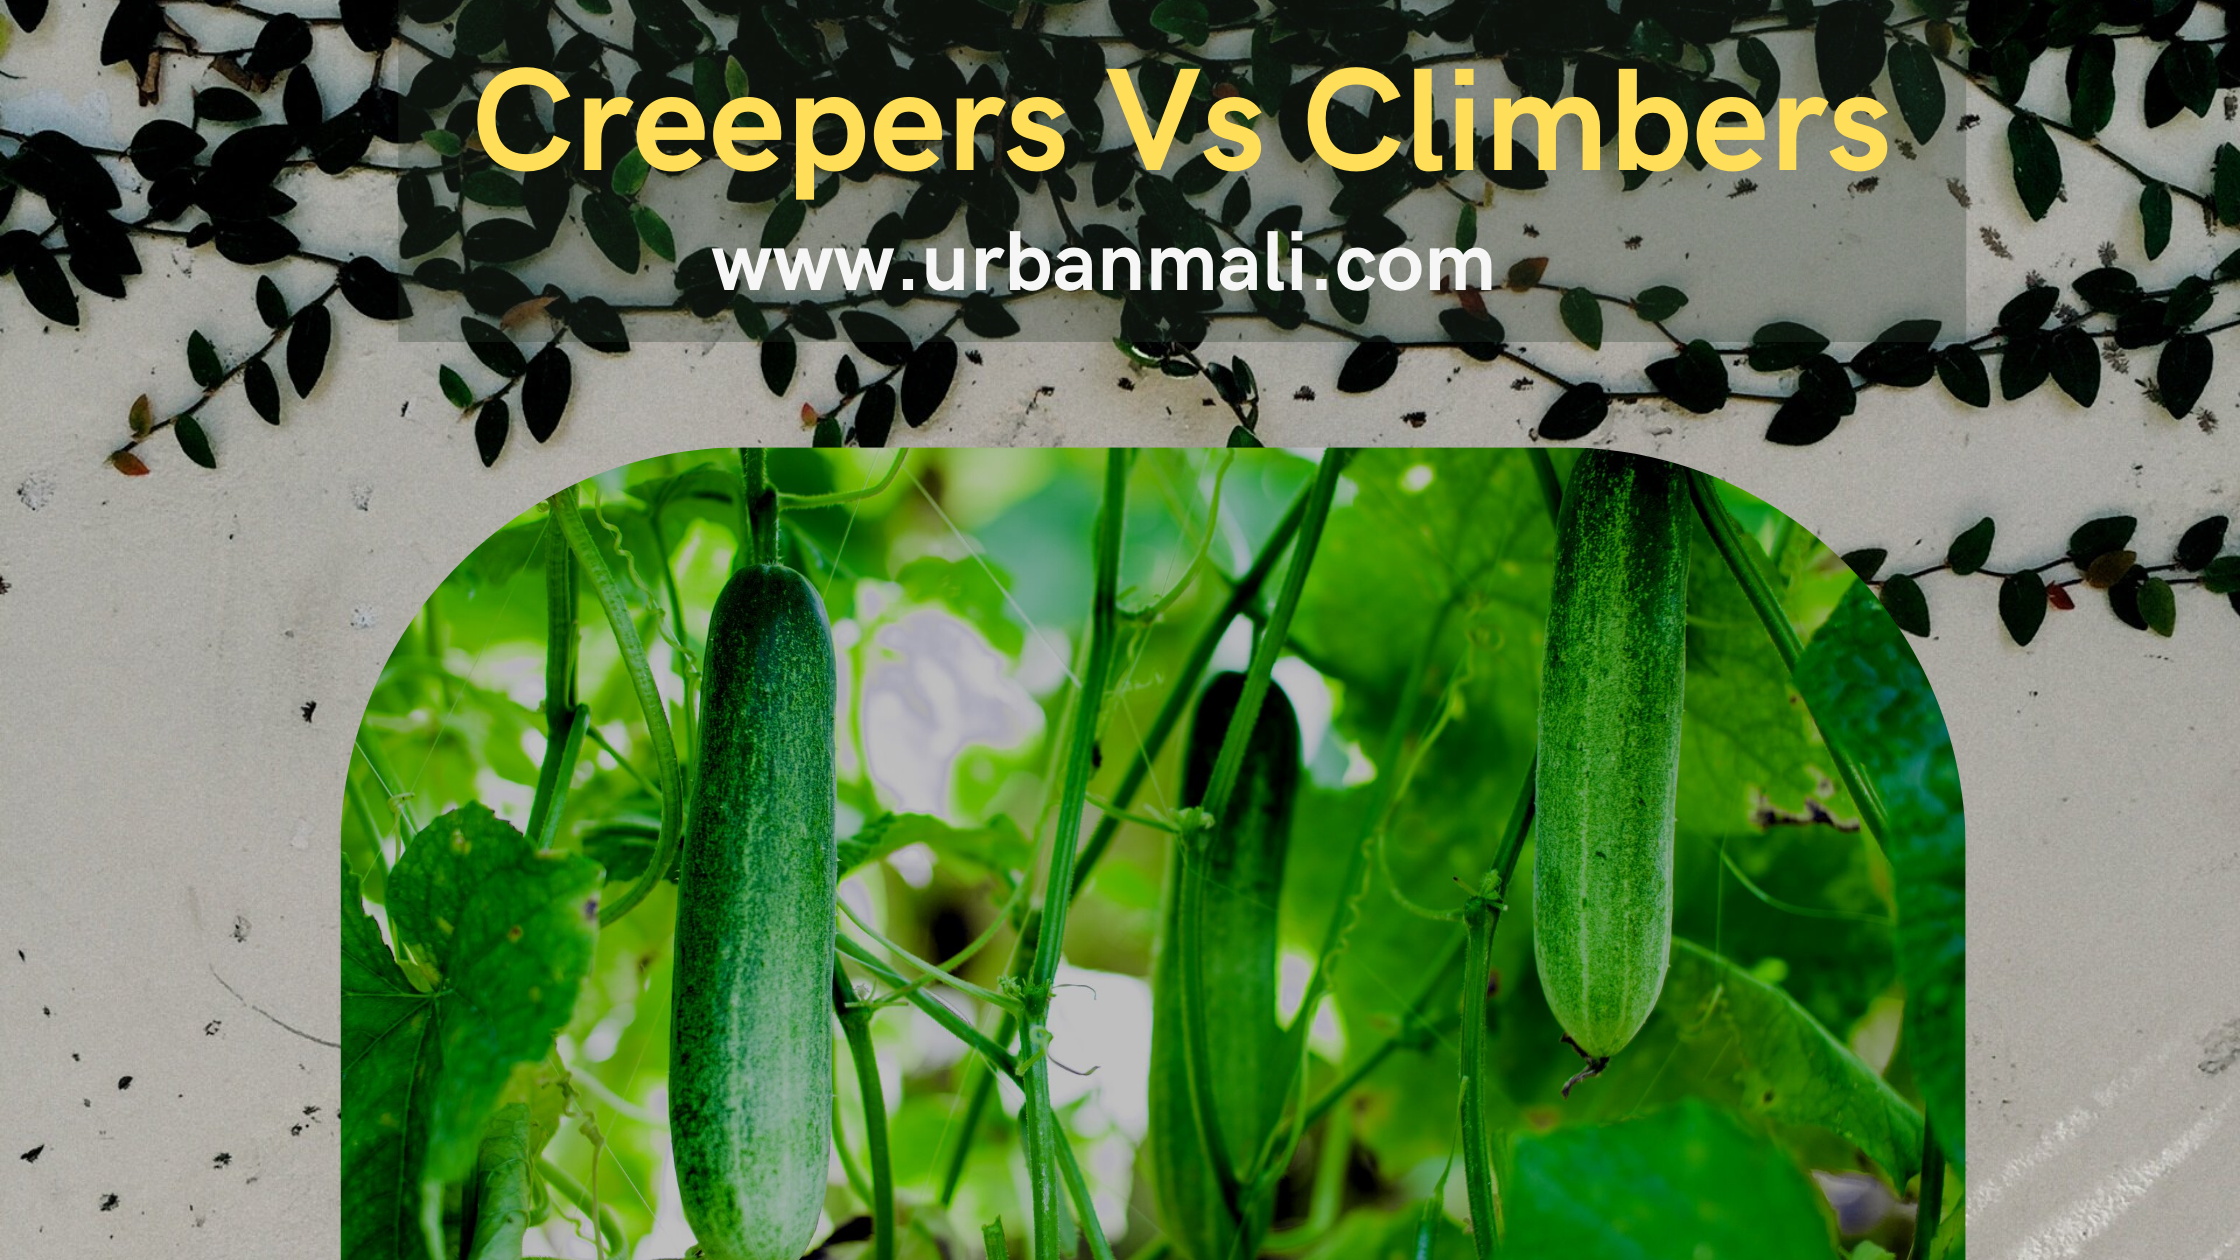 How to Grow Climbers and Creepers in your garden